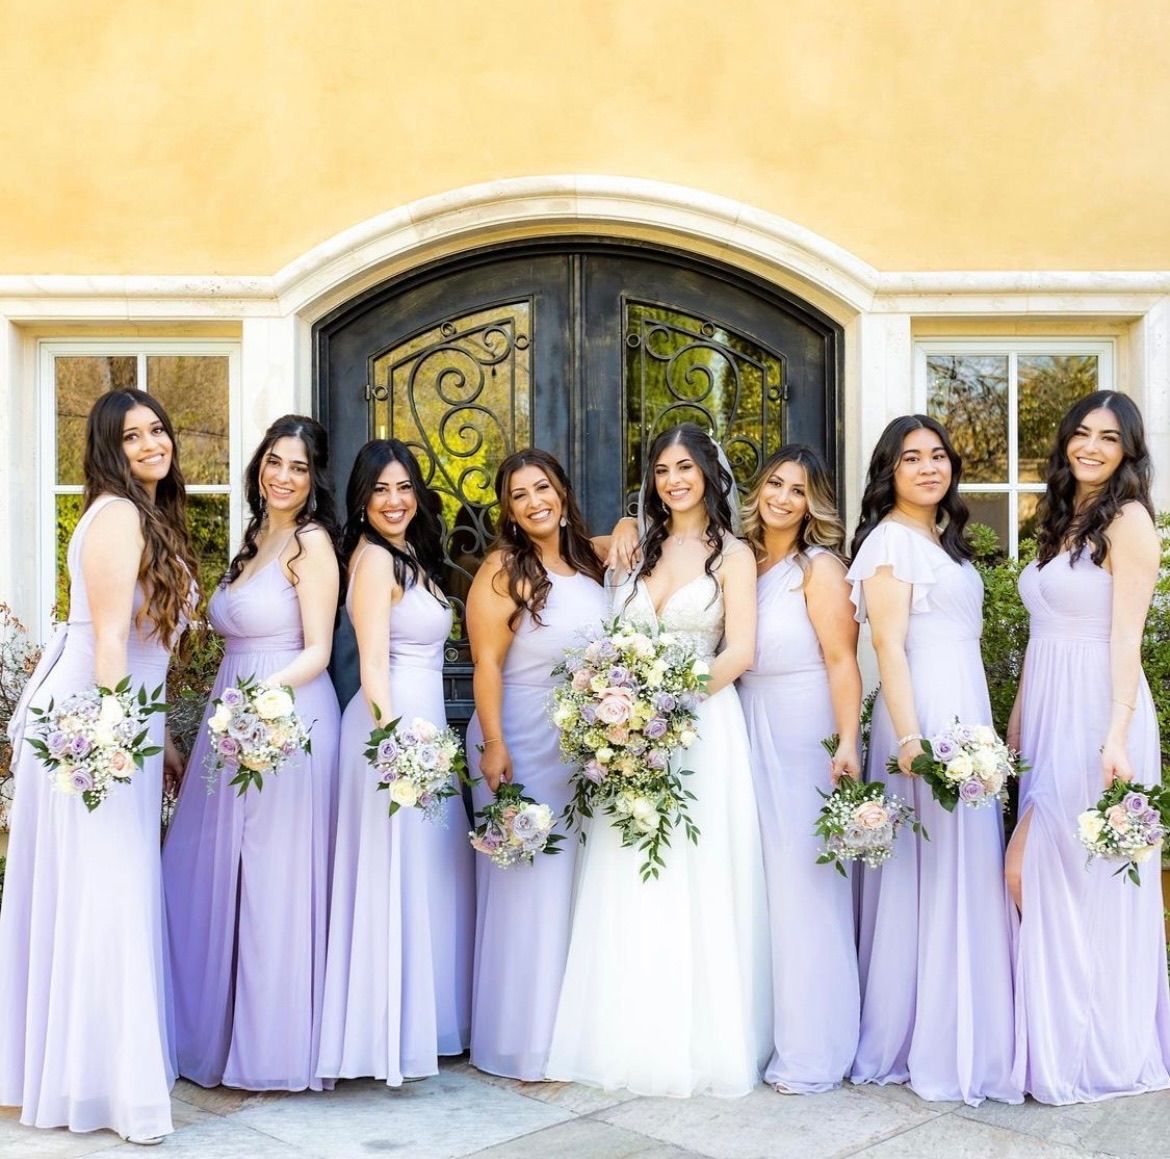 Wedding Party Holding Flower Bouquets